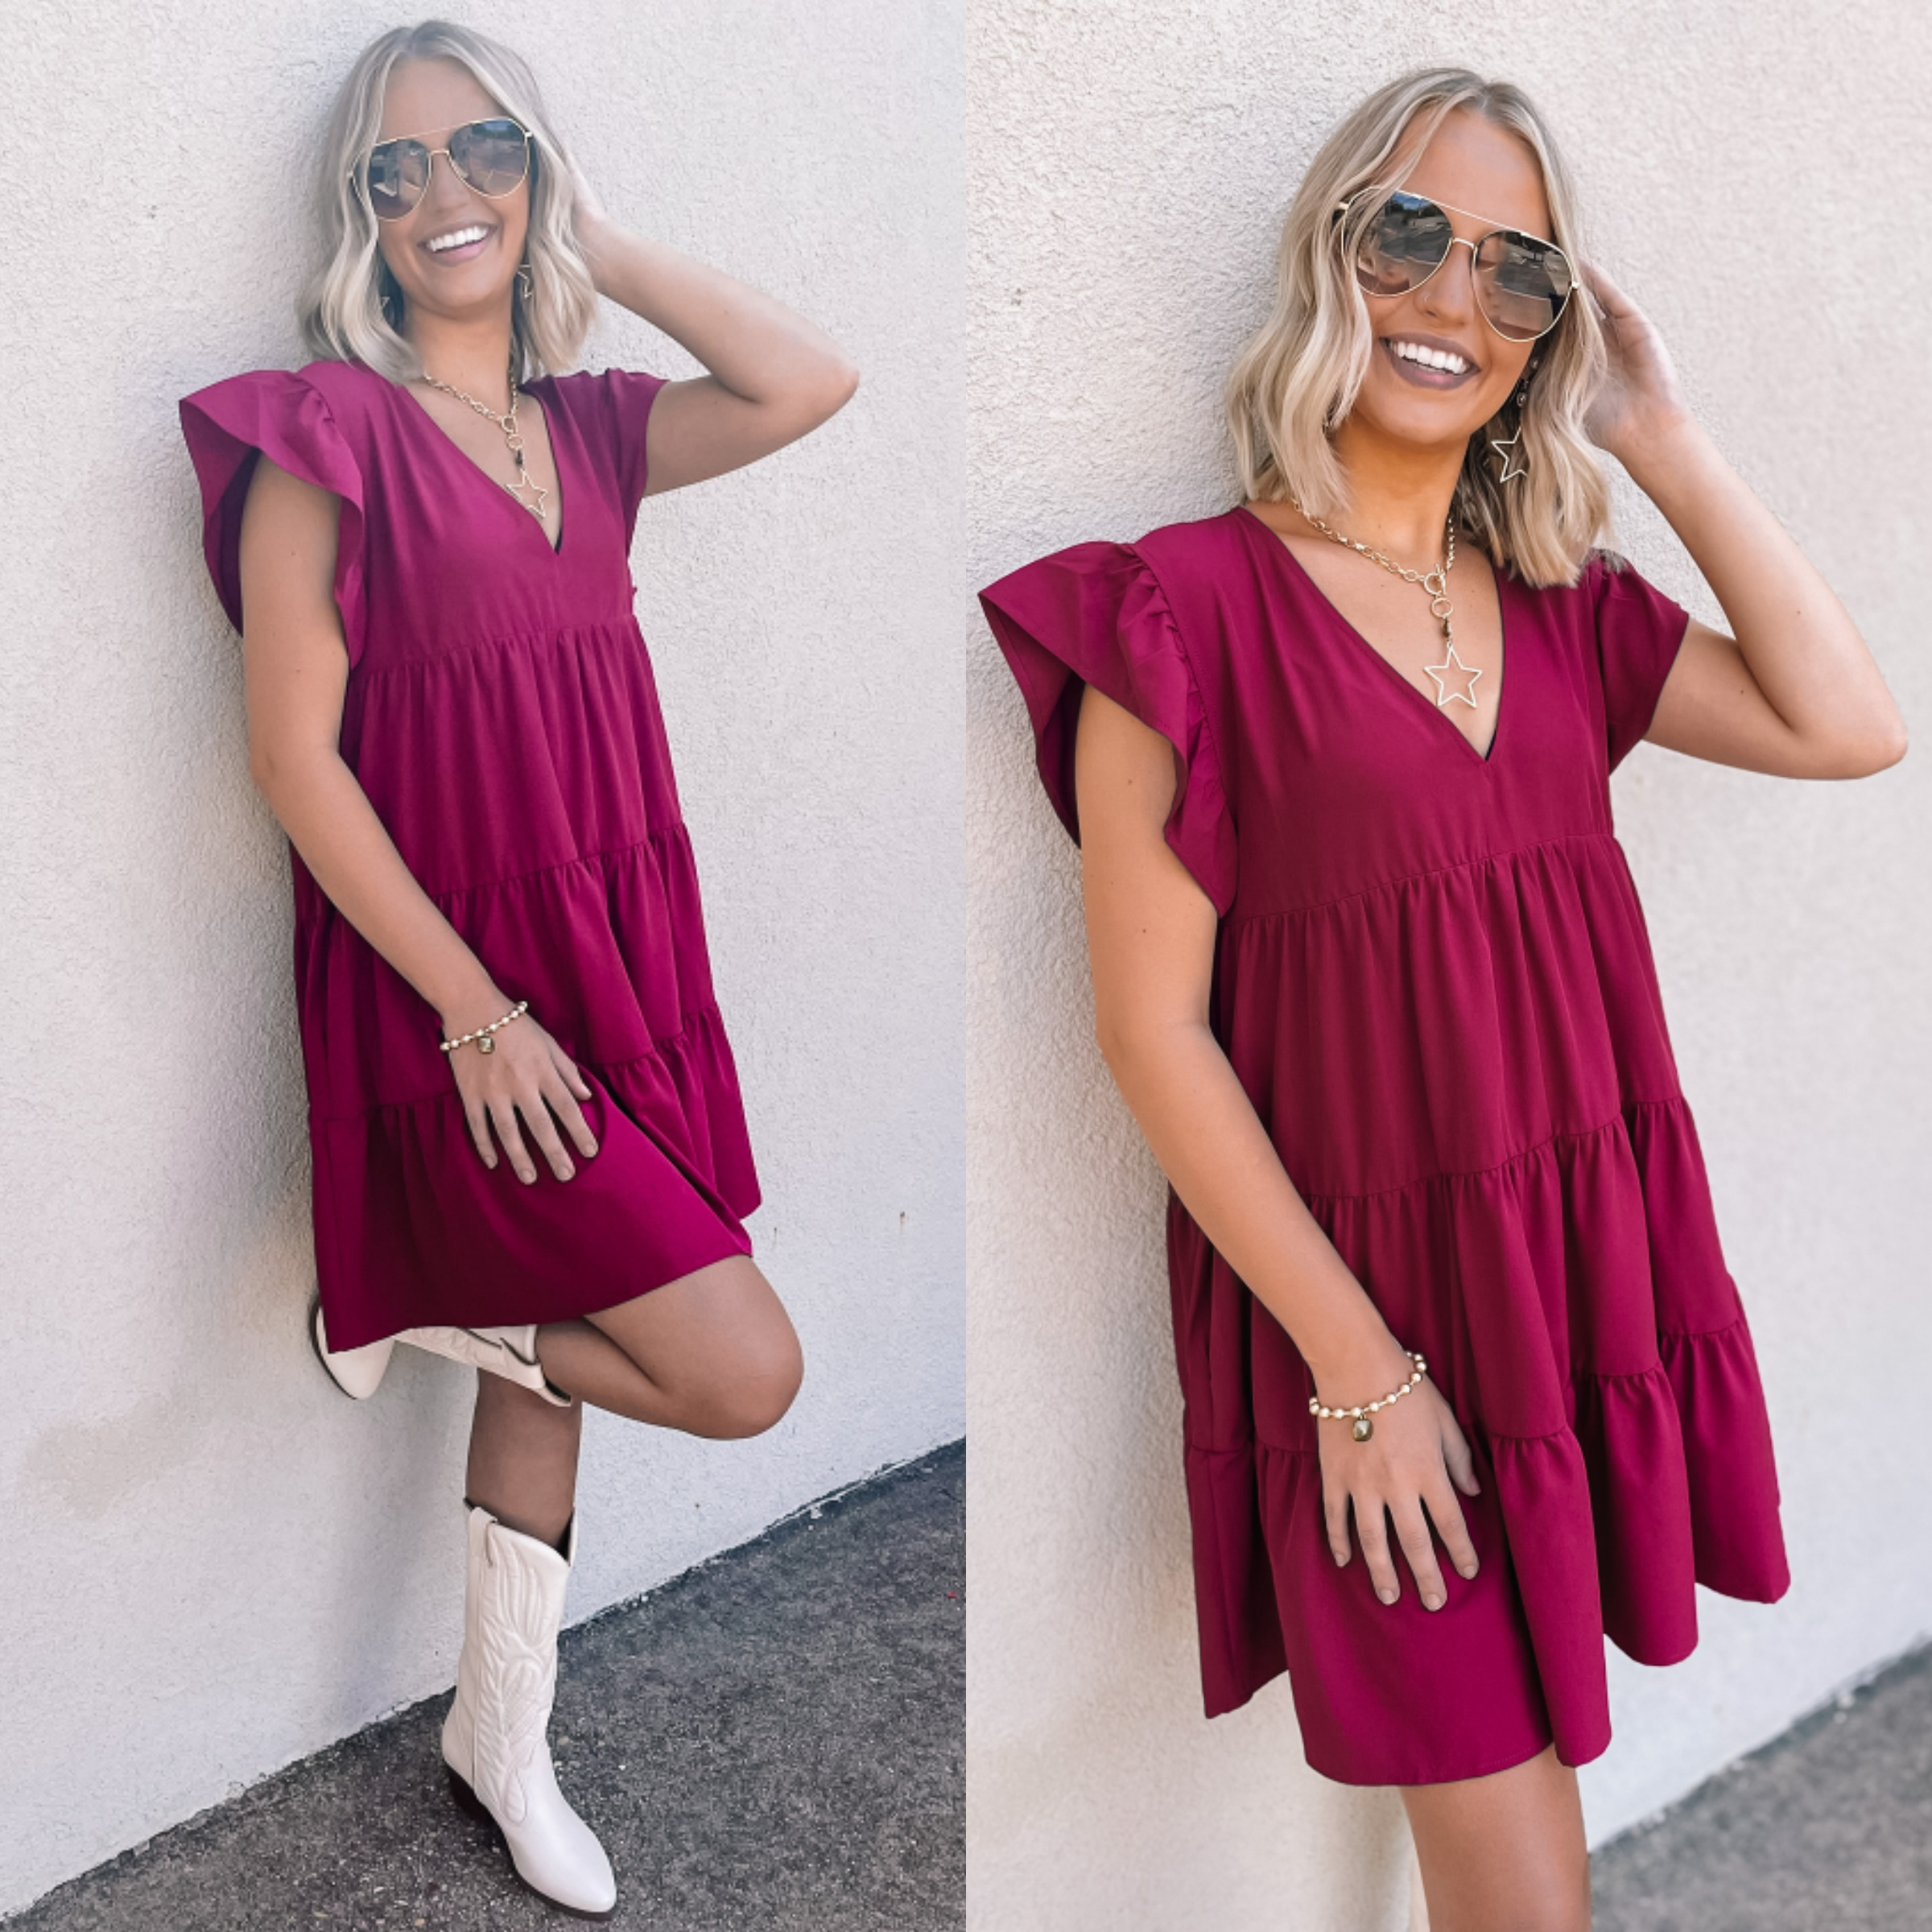 Model is wearing a maroon dress with ruffle cap sleeves and a v neckline. Model has it paired with white boots, gold jewelry, and brown sunglasses.